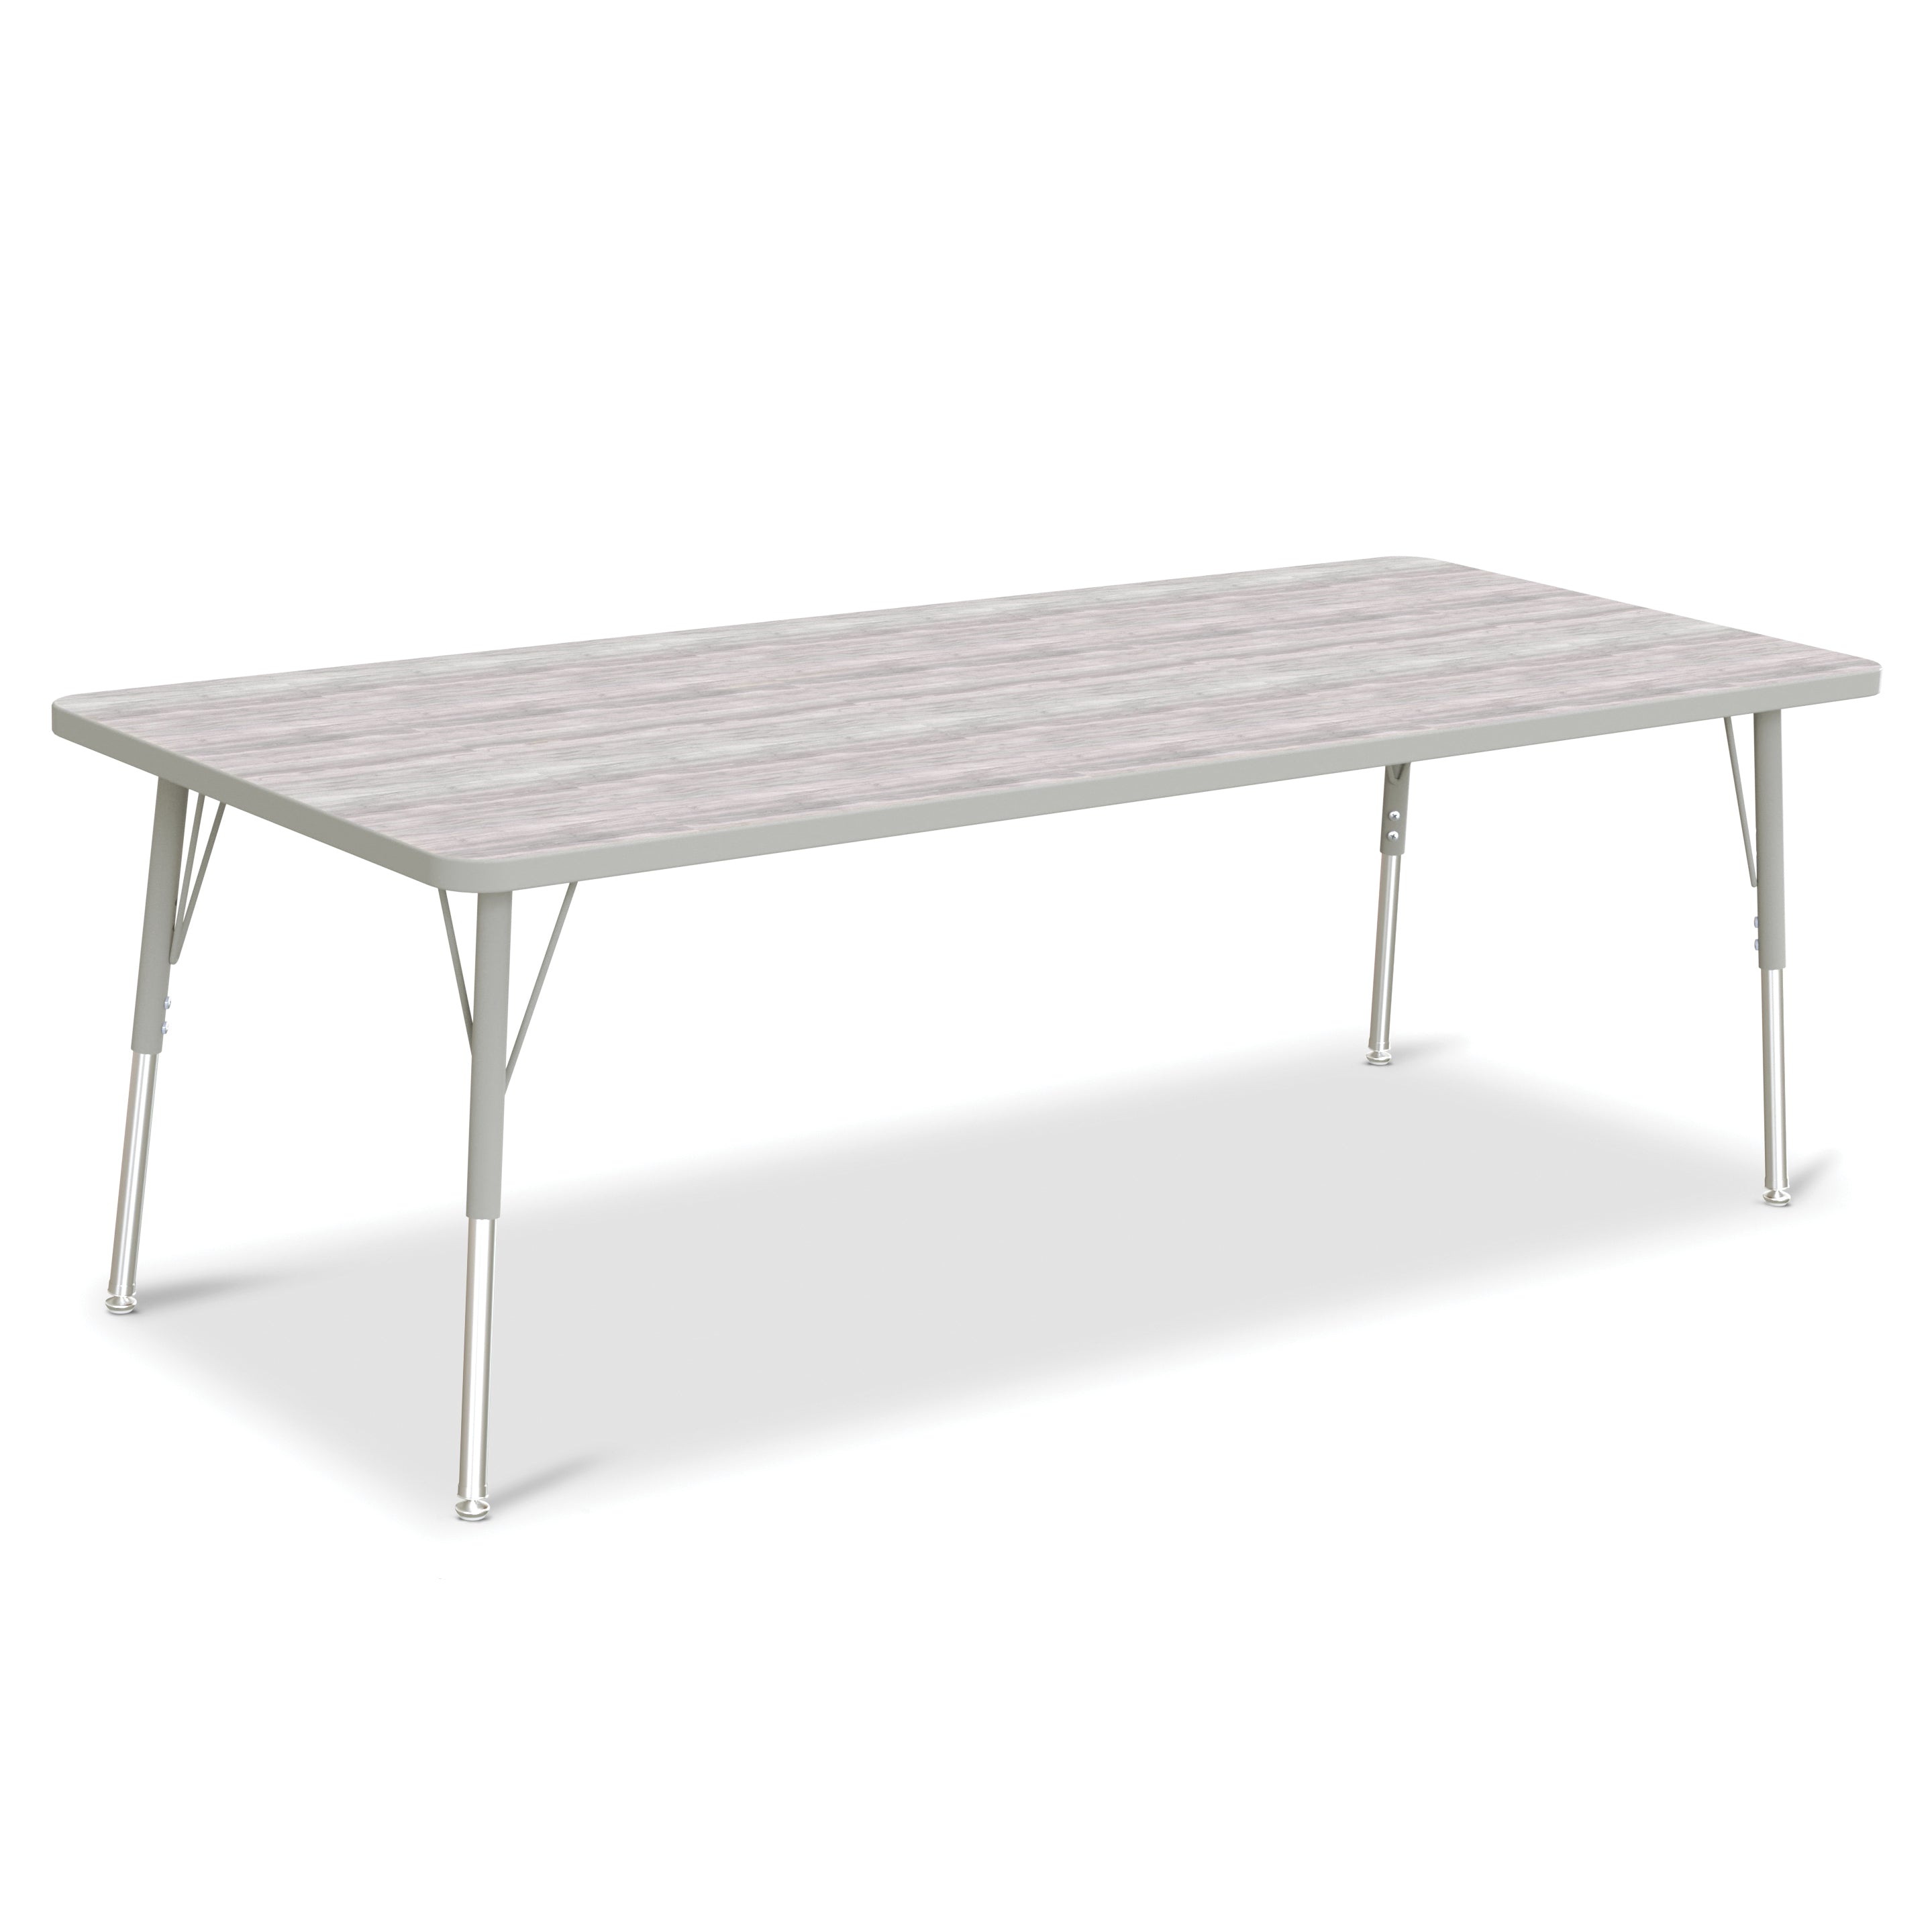 6413JCA450, Berries Rectangle Activity Table - 30" X 72", A-height - Driftwood Gray/Gray/Gray